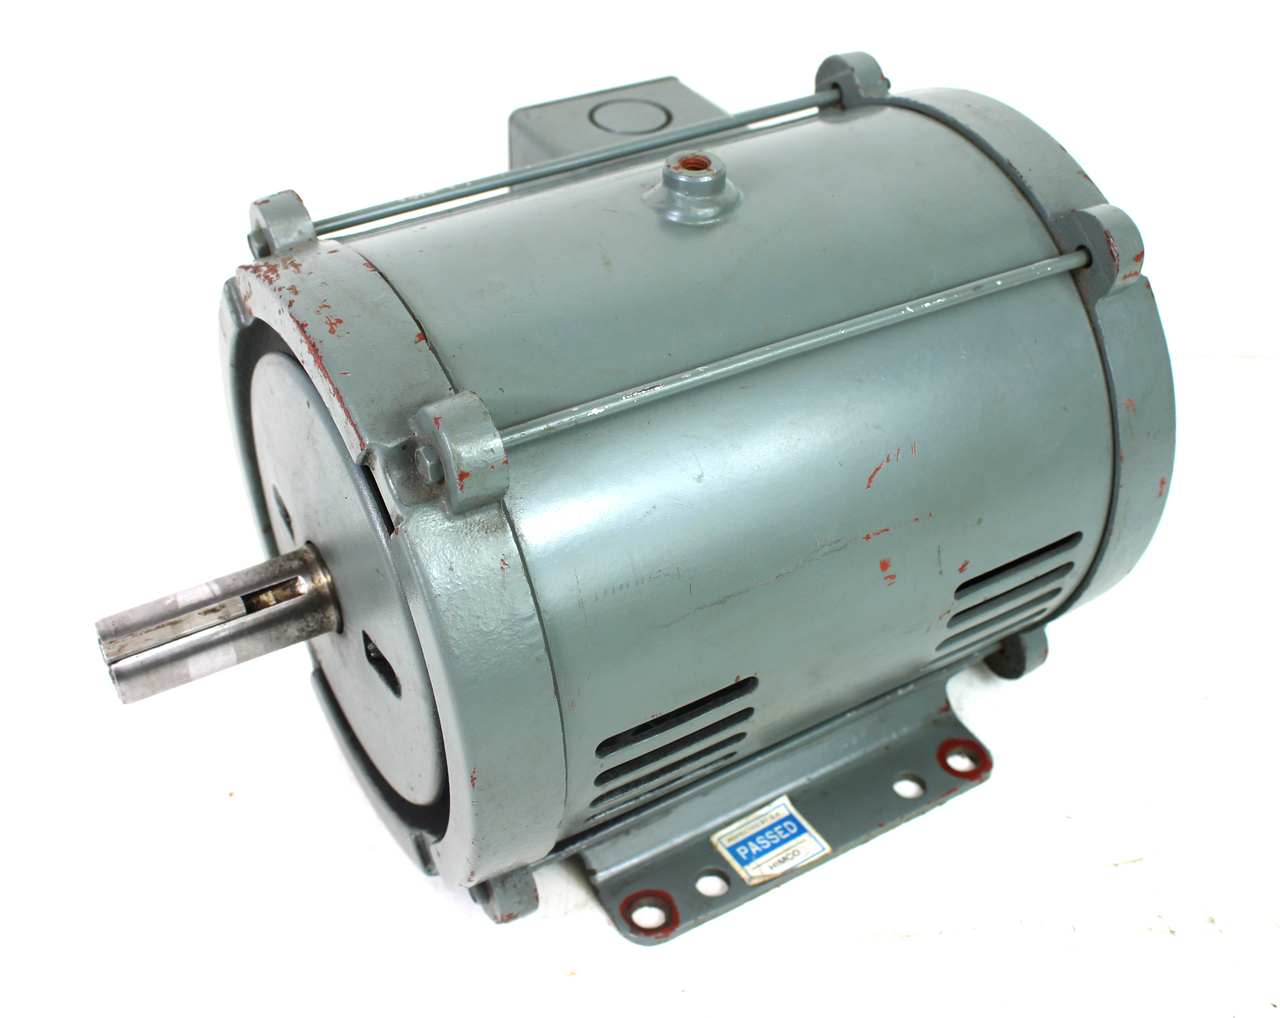 Details about   GENERAL ELECTRIC 5K184BL315B 2 HP 3 PH 1155 RPM FR 184T INDUCTION MOTOR 